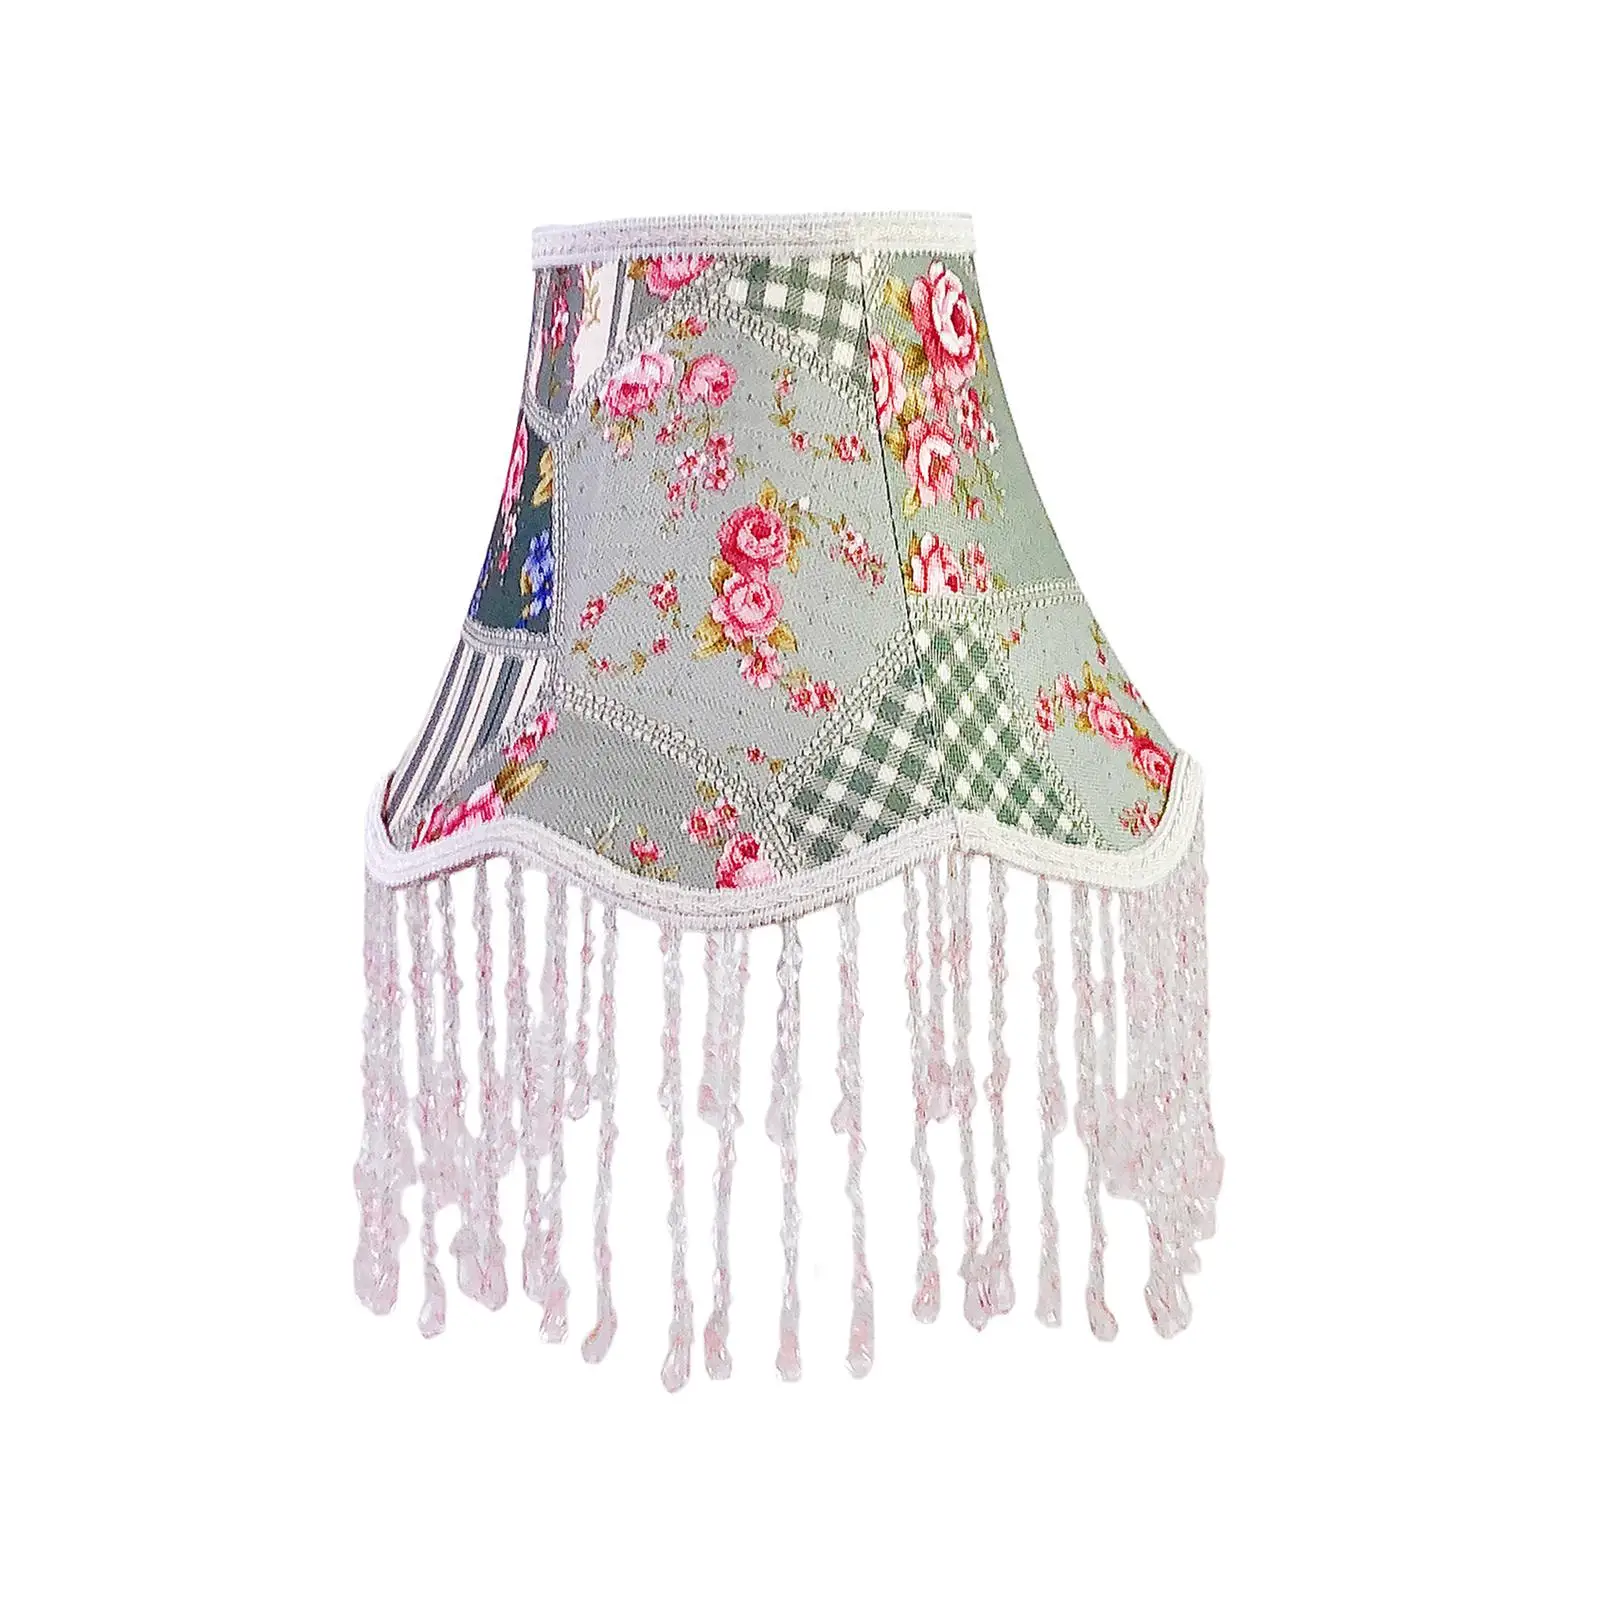 Fringe Beads Lamp Shade for Table Floor Pendant Lamp European Lampshade for Dining Room Home Office Hotel Living Room Bedroom